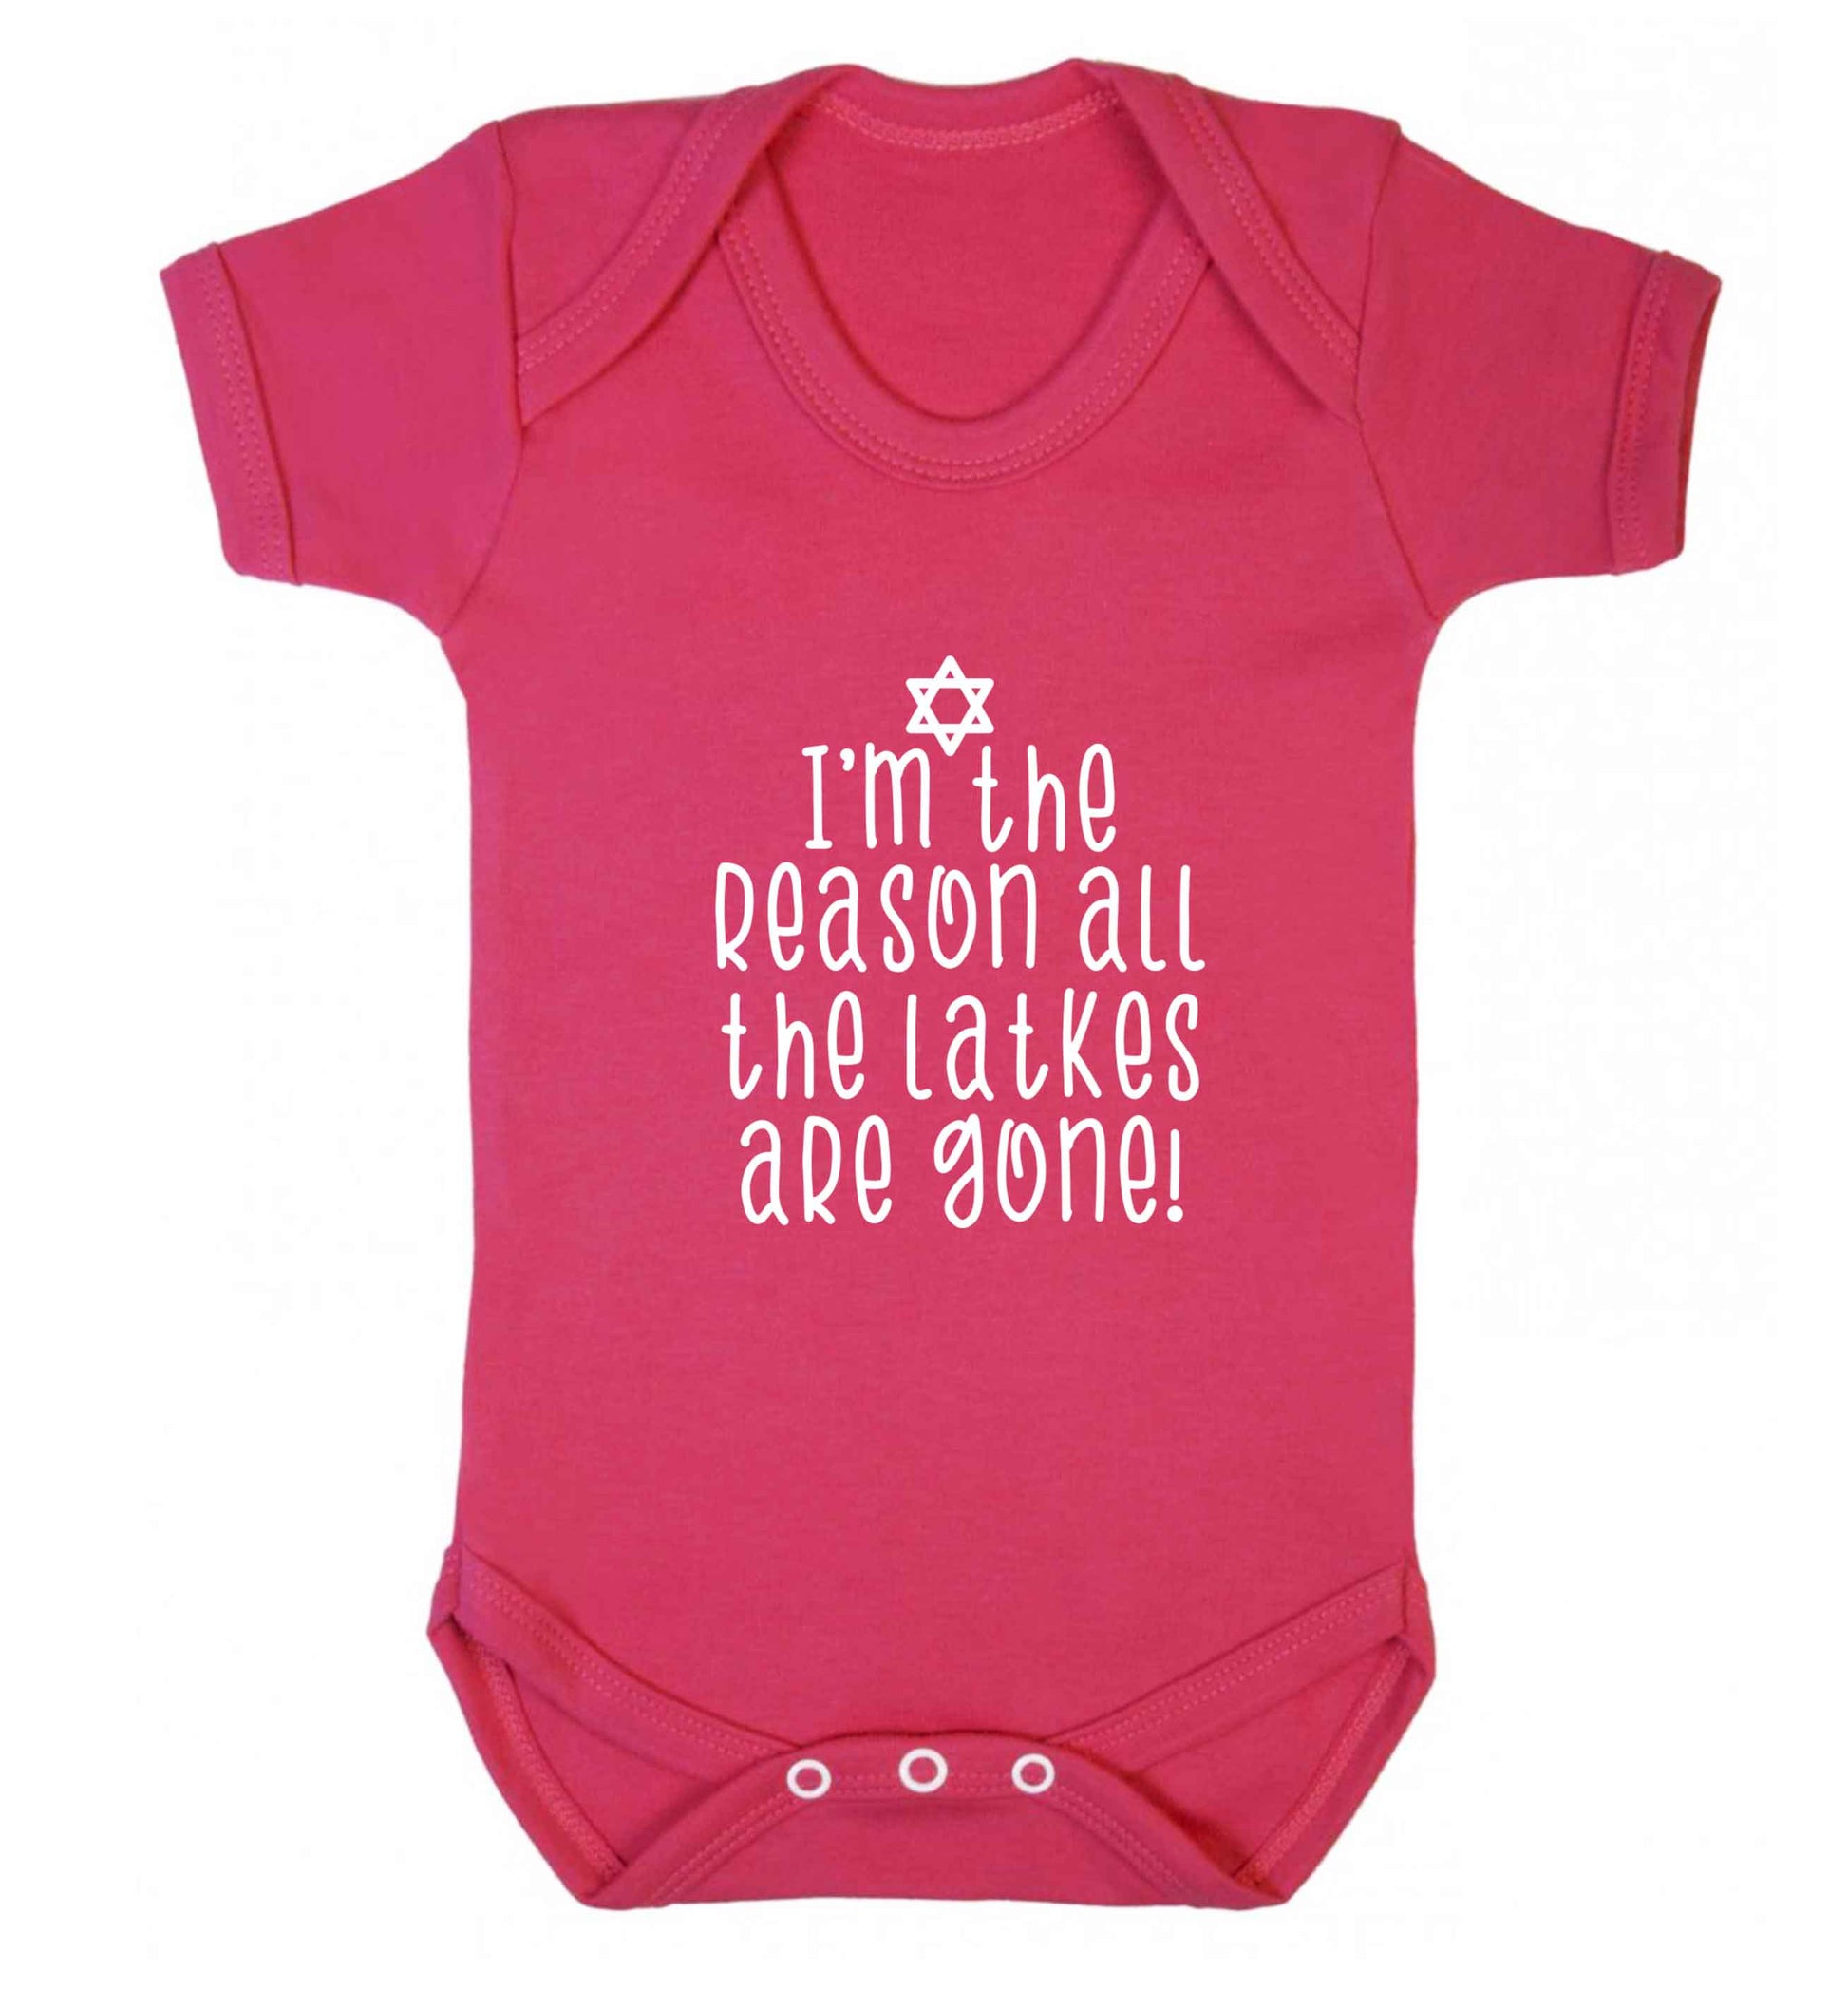 I'm the reason all the latkes are gone baby vest dark pink 18-24 months